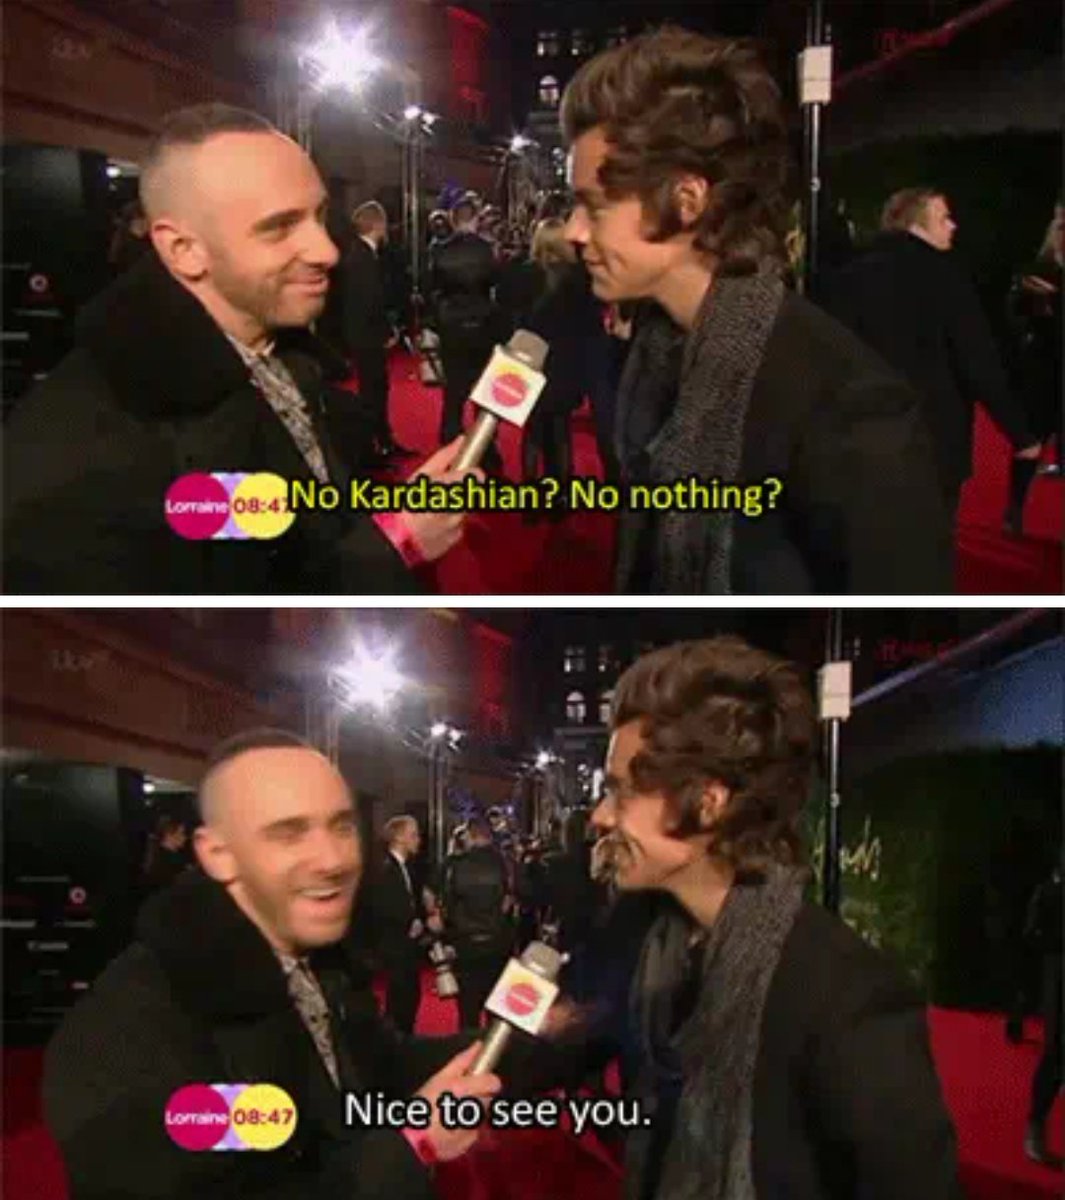 02 December 2013: Harry gets asked about Kendall at the British Fashion Awards but changes the subject.